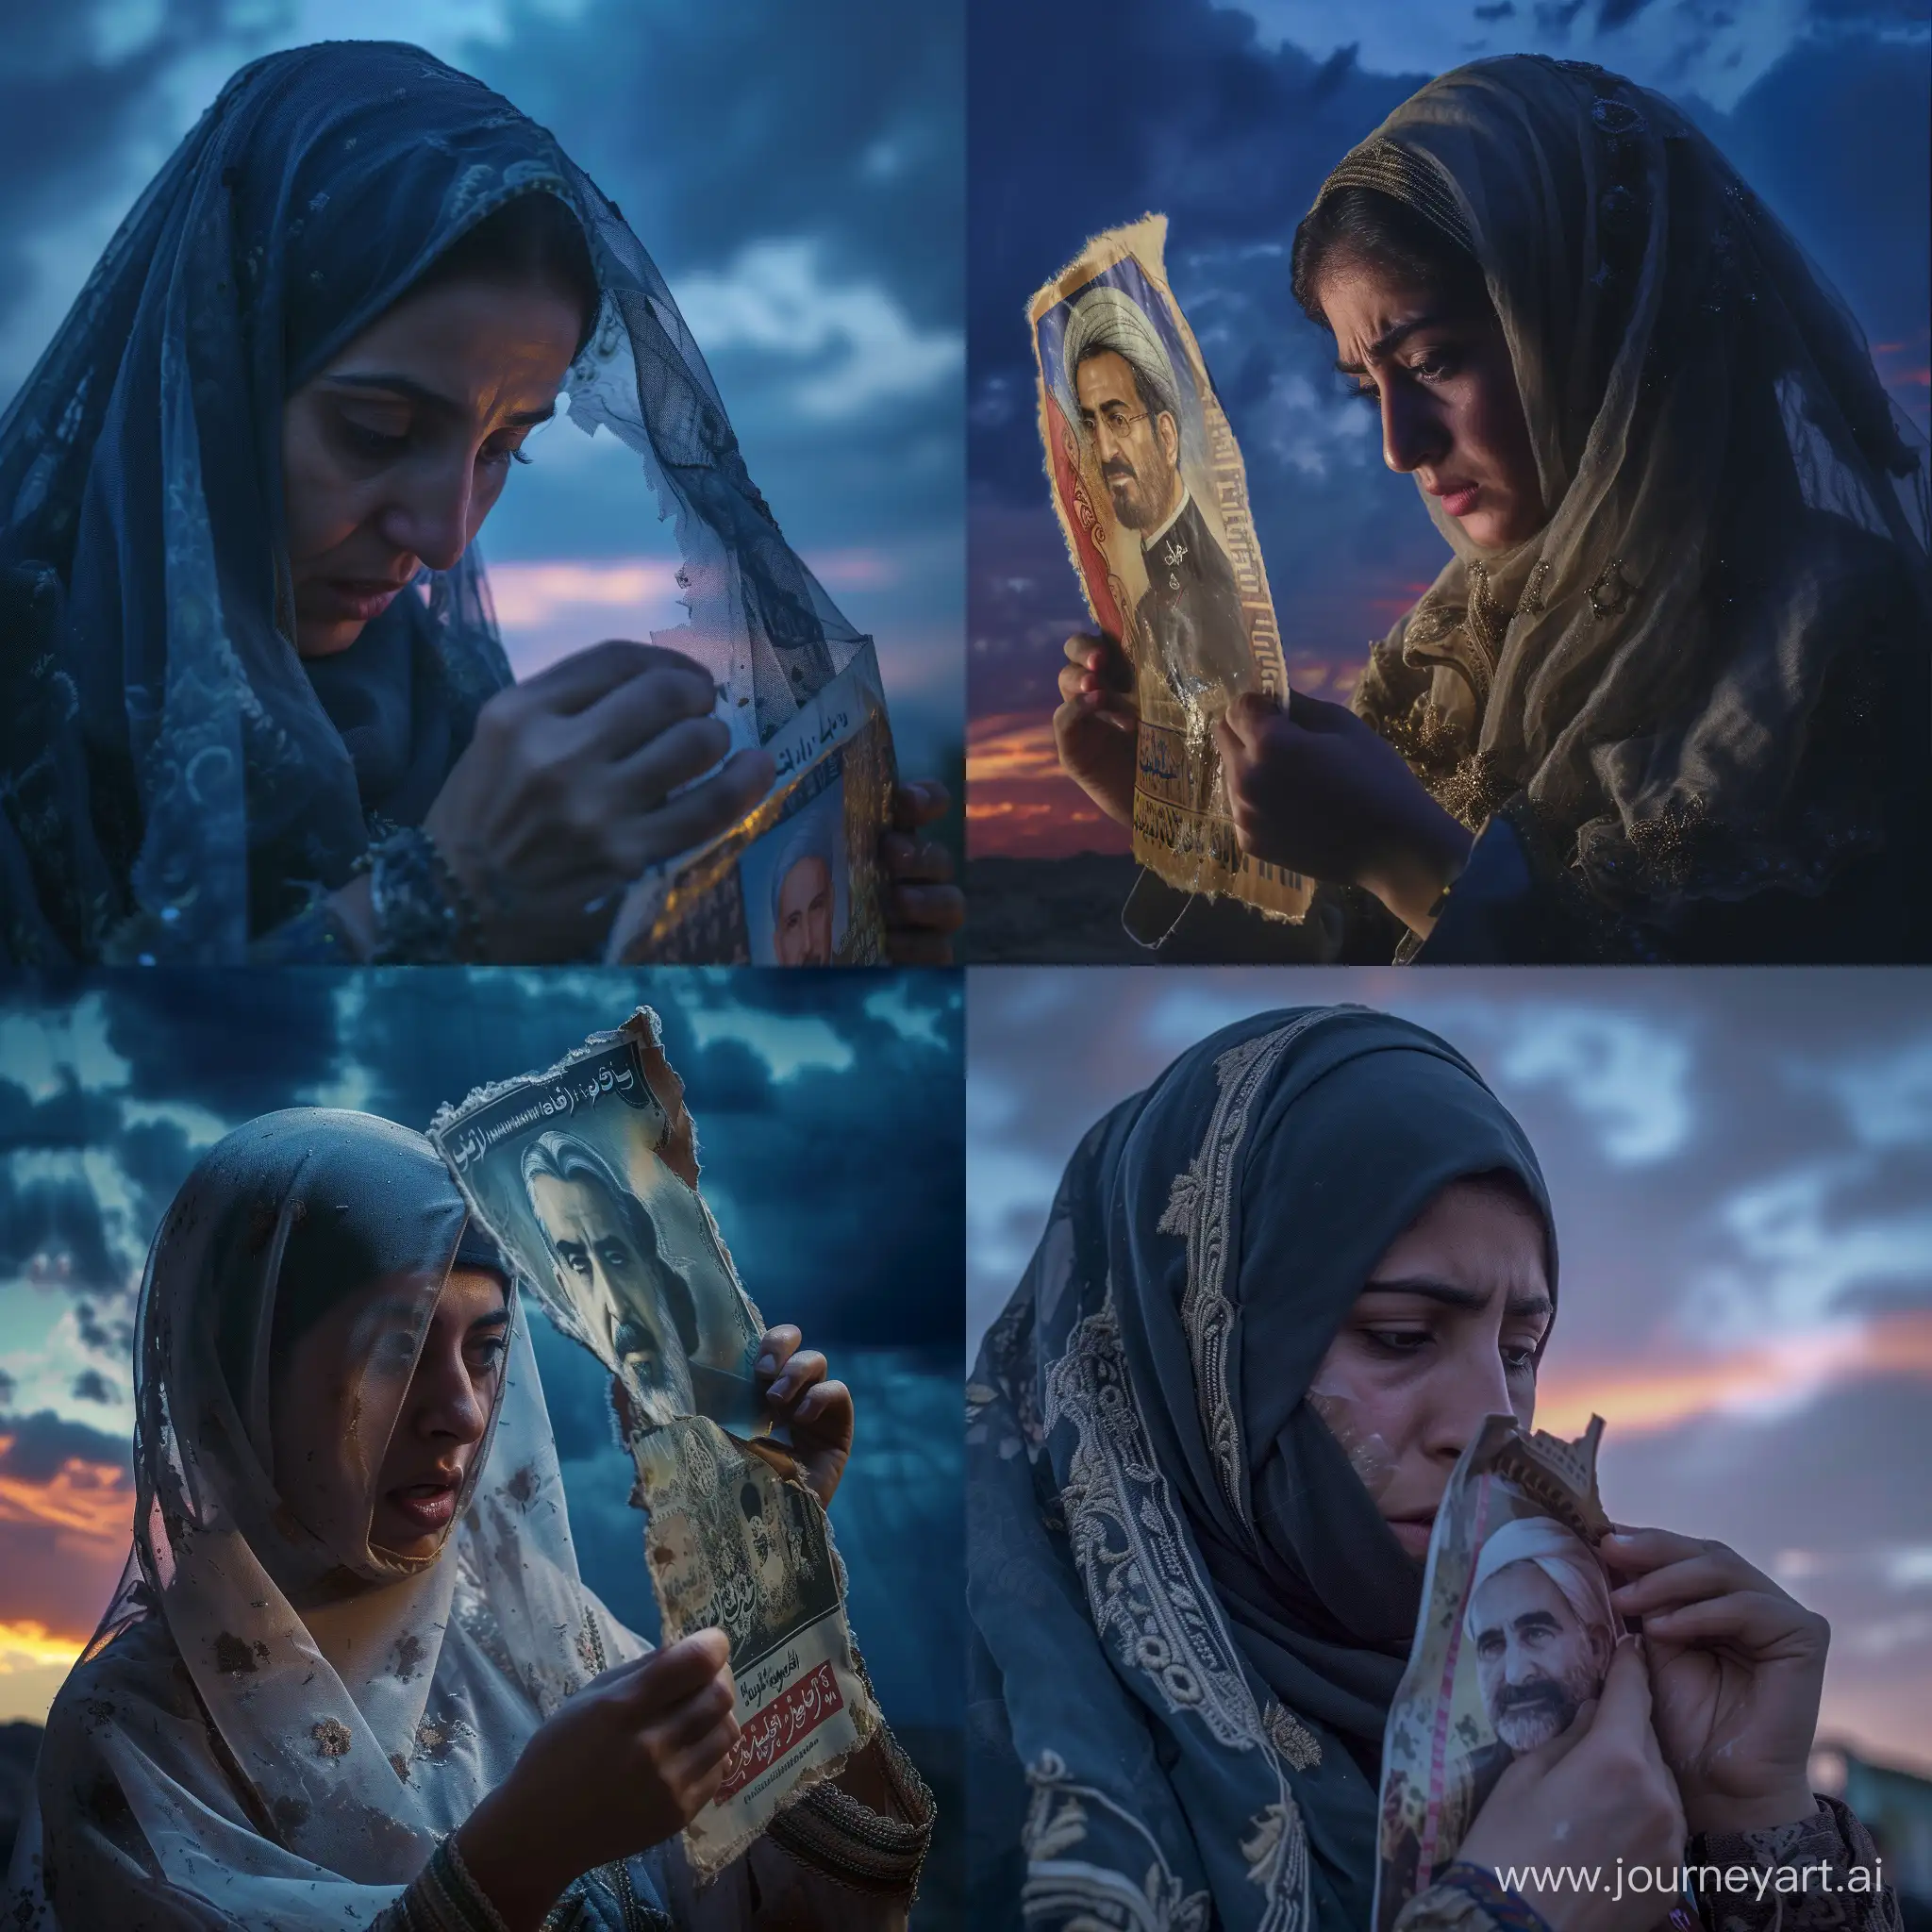 A striking image of a veiled woman, her expression a mix of determination and defiance, as she tears a poster of the last Shah of Pahlavi. The scene unfolds under the vibrant sky of dusk, casting a dramatic light on the action and highlighting the contrast between the old and the new, the past and the present. The woman's traditional attire symbolizes cultural identity and change, while the act of tearing the poster signifies a rejection of the past and a move towards a new future. The background is intentionally blurred, focusing all attention on the woman and the poster, making the moment not just historical but deeply personal.